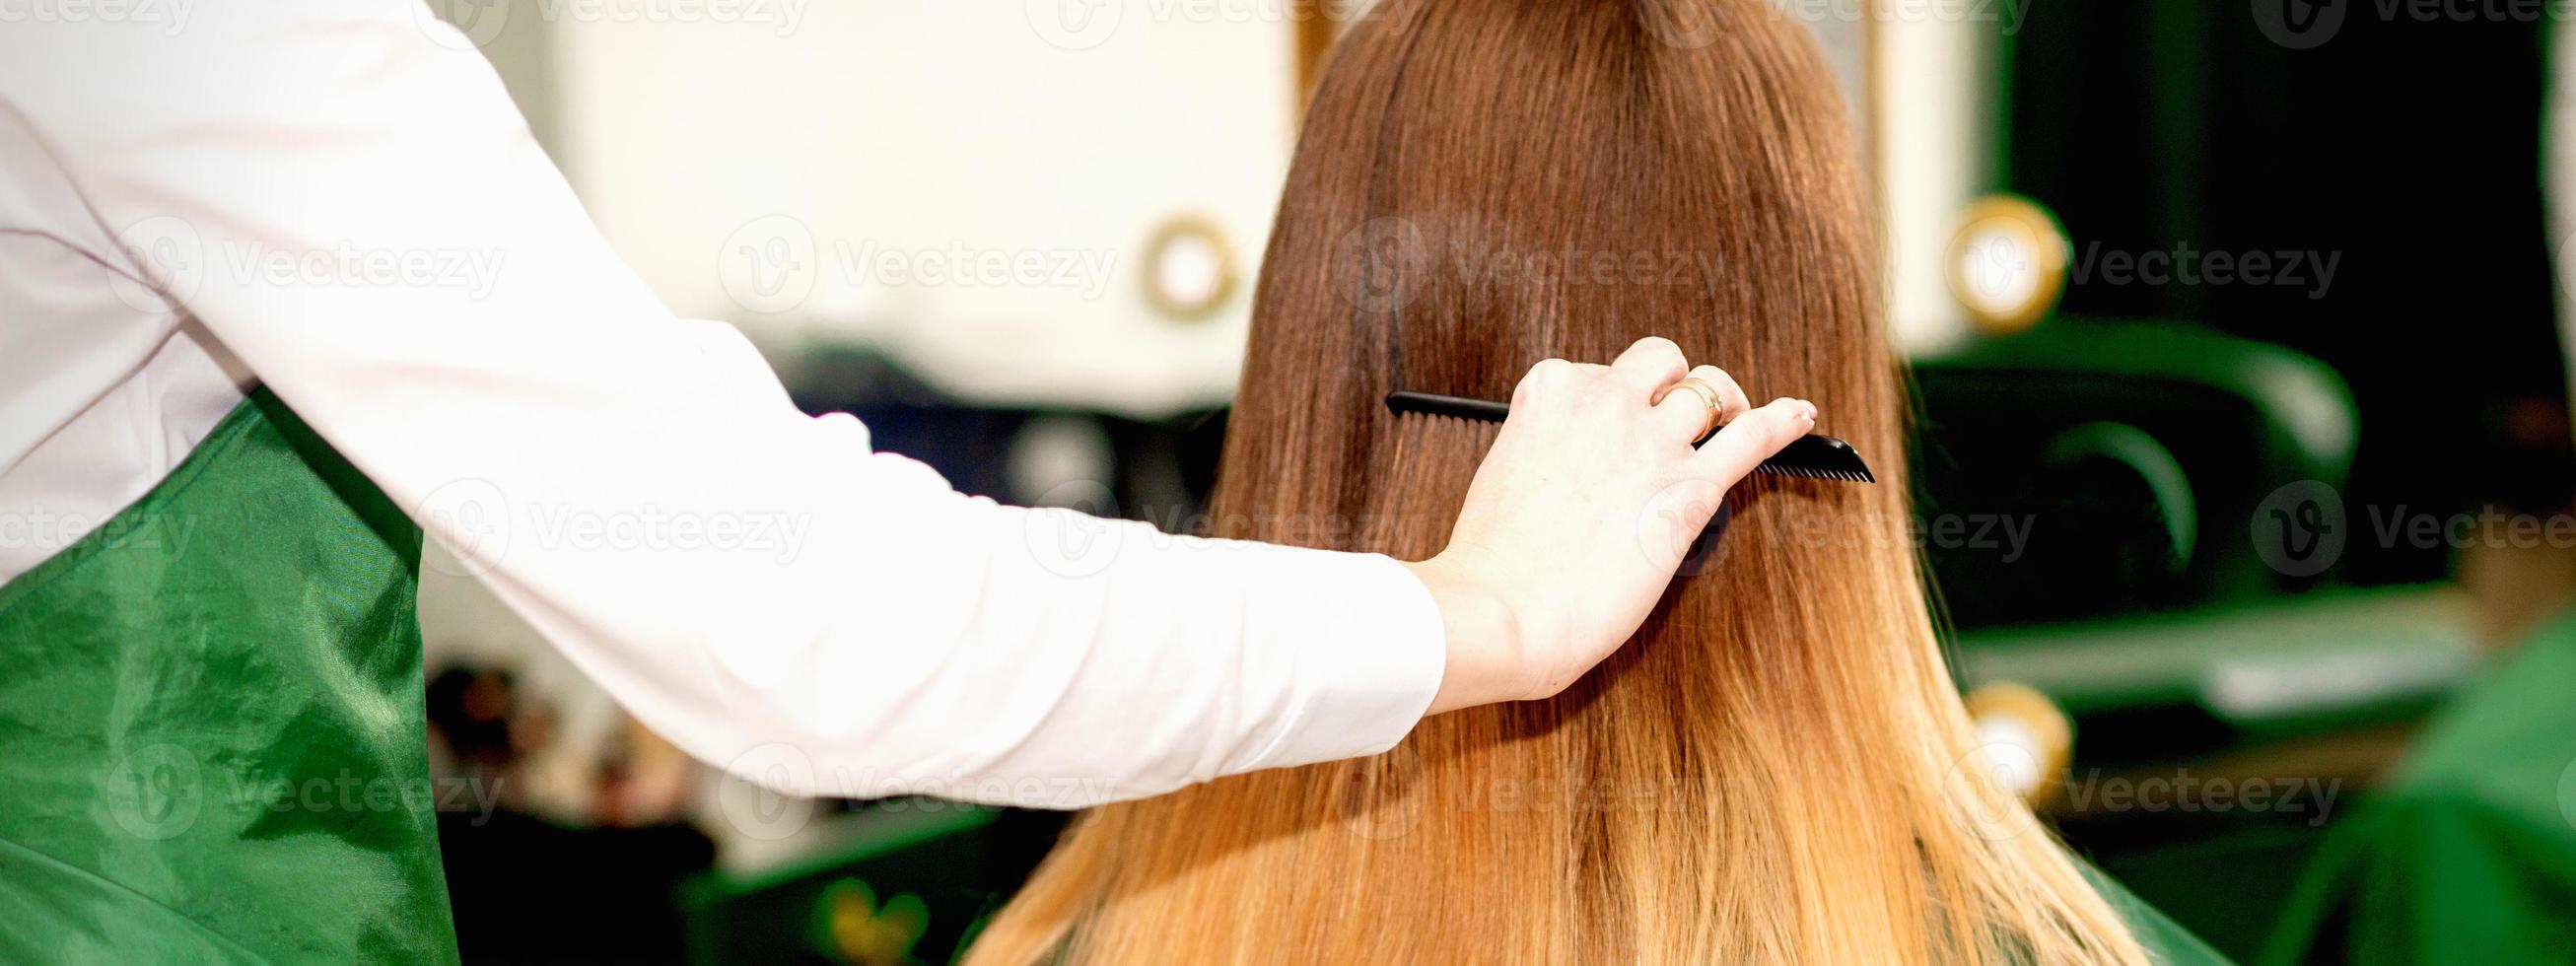 Hairdresser combing long hair of client photo